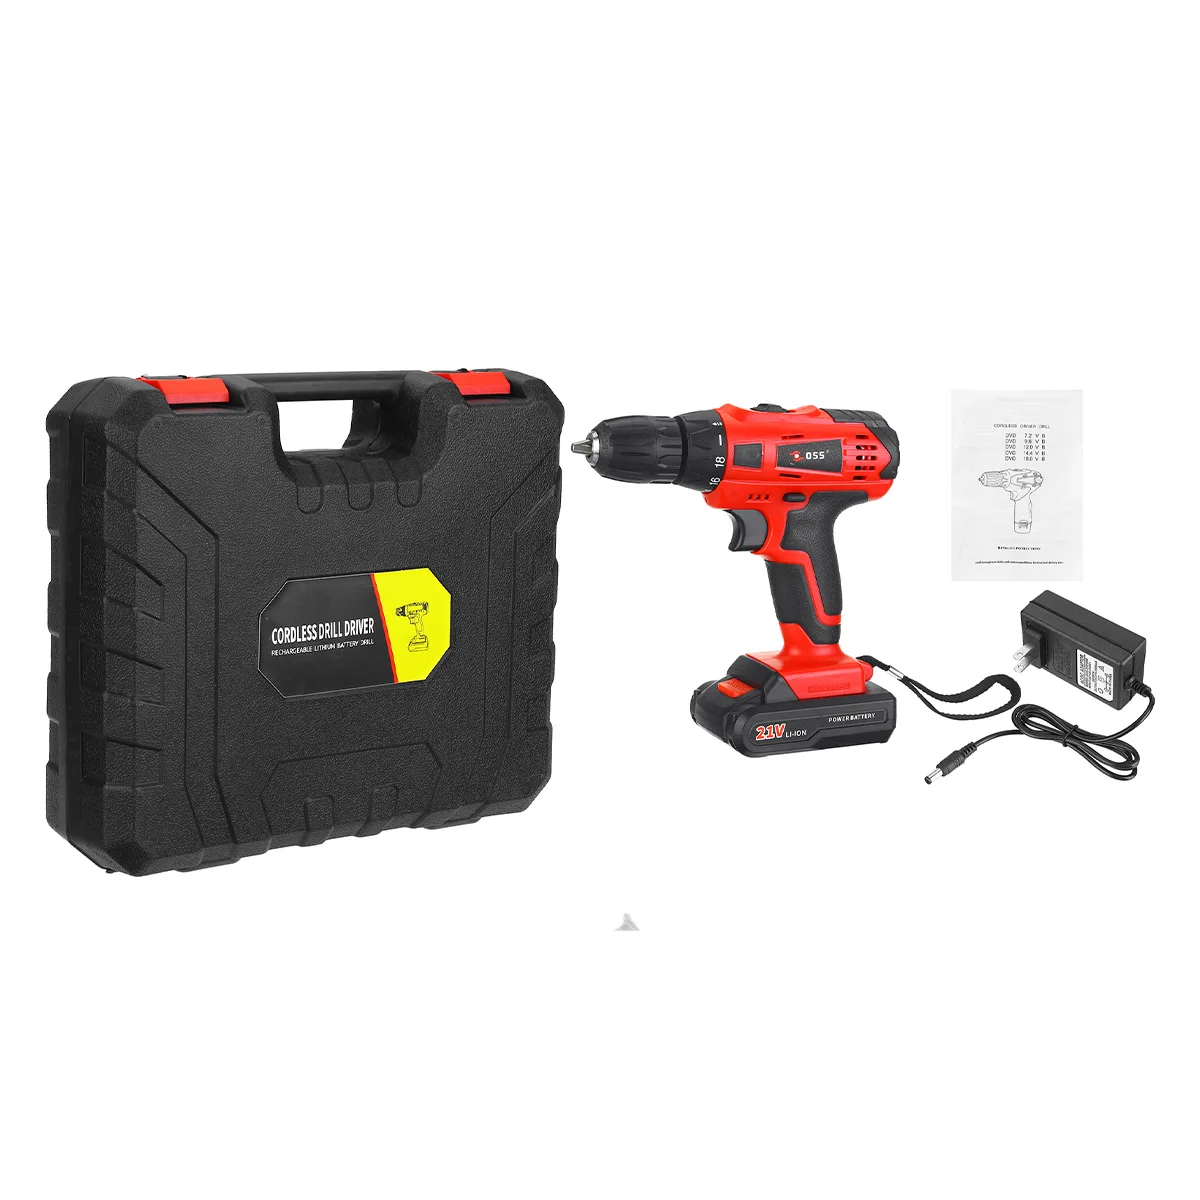 

21V 1800RPM Cordless Electric Drill 18 Gears Torque Rechargable Electric Screwdriver Home DIY Power Tool with Lithium Battery